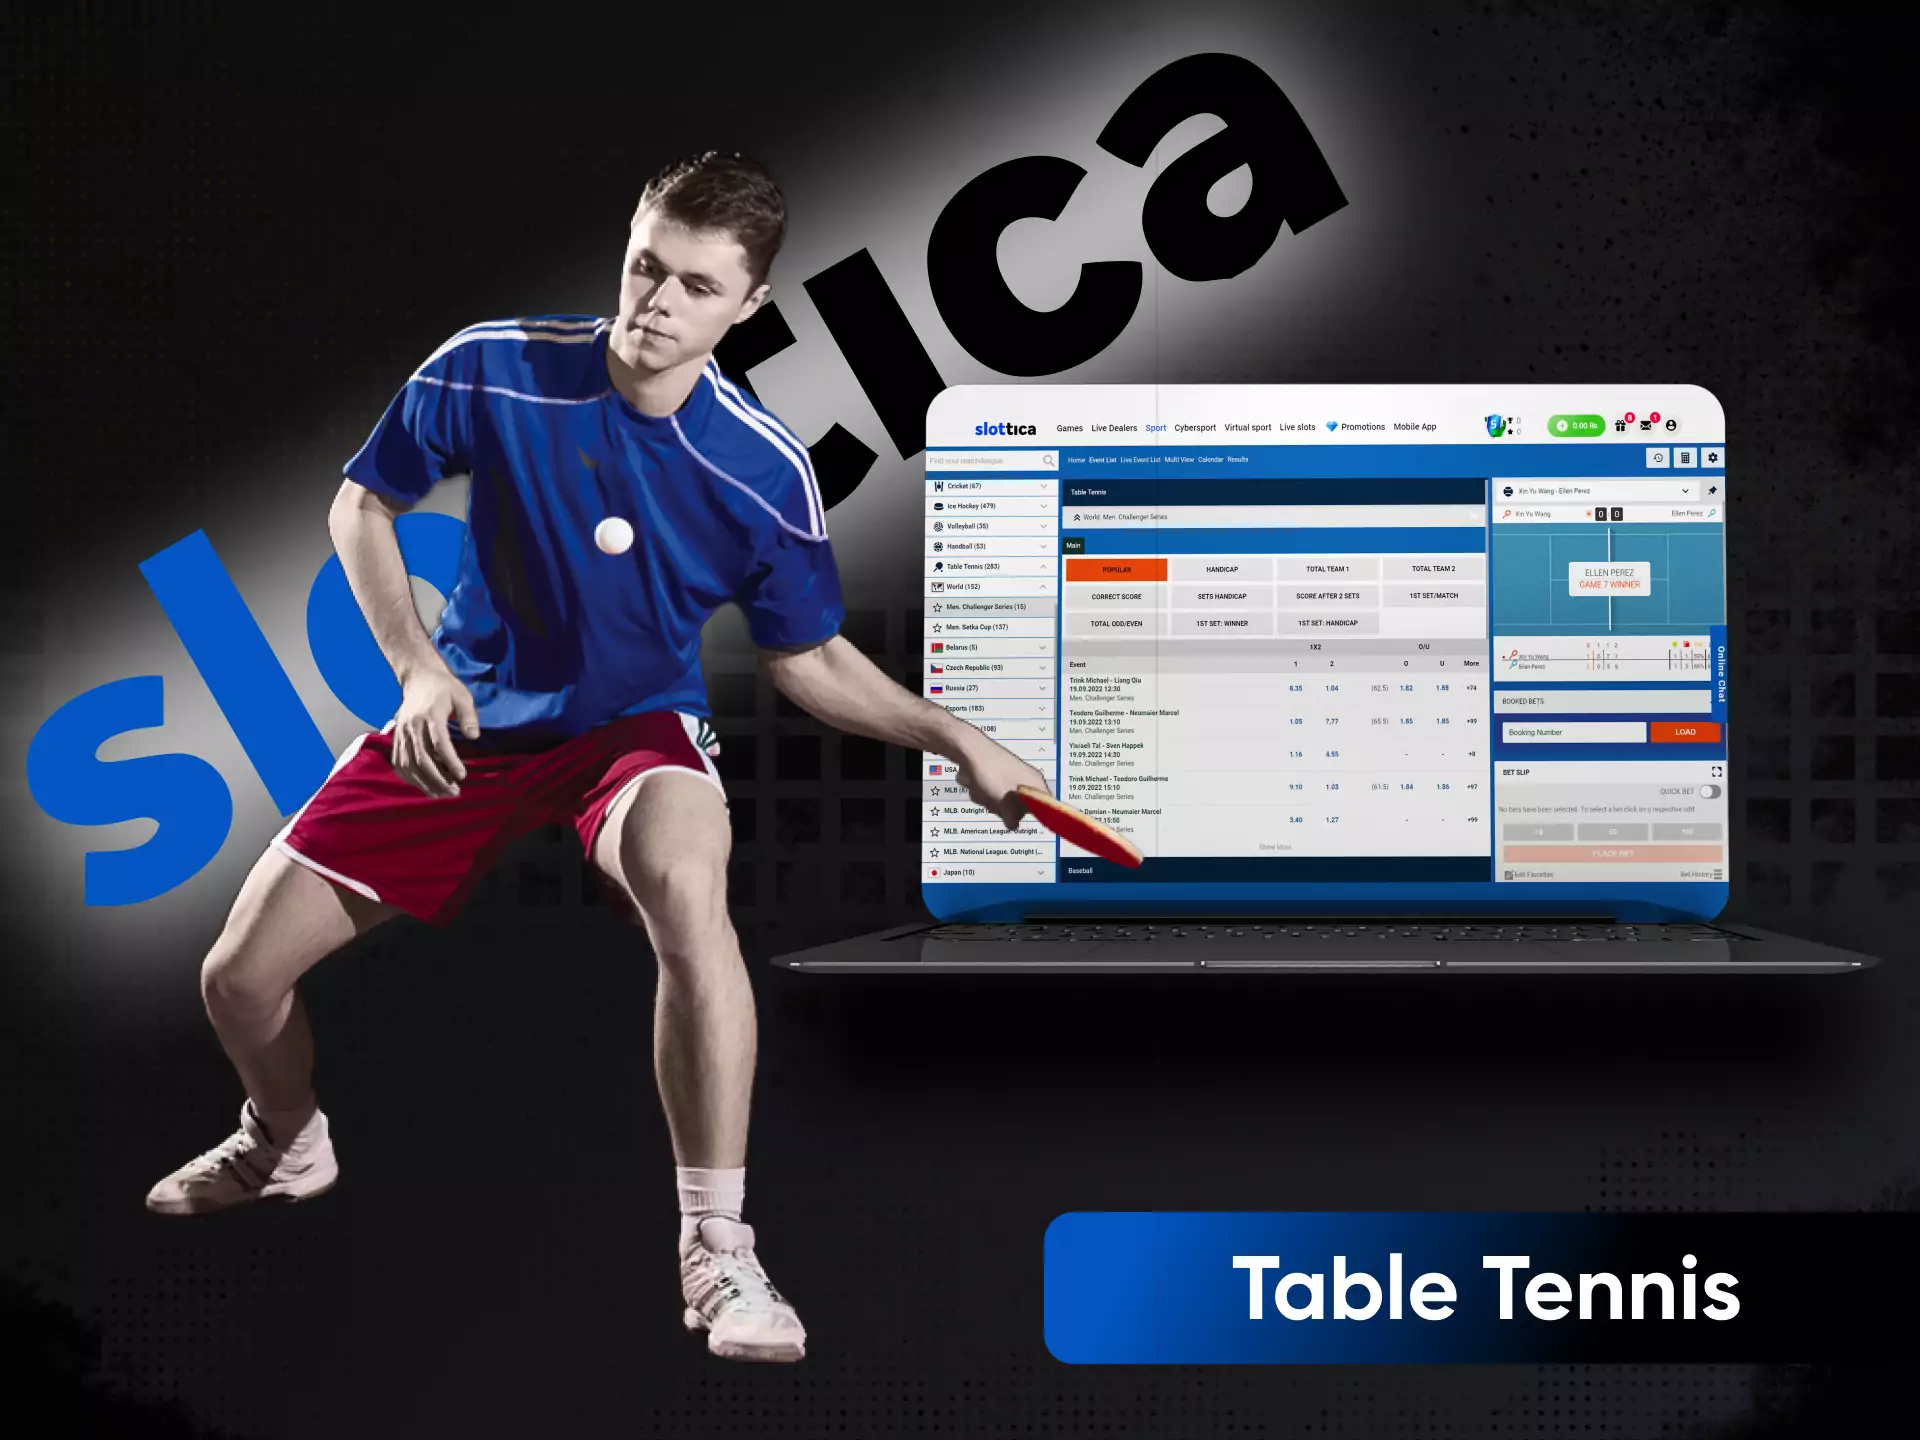 On the Slottica website, you can follow and bet on table tennis events.